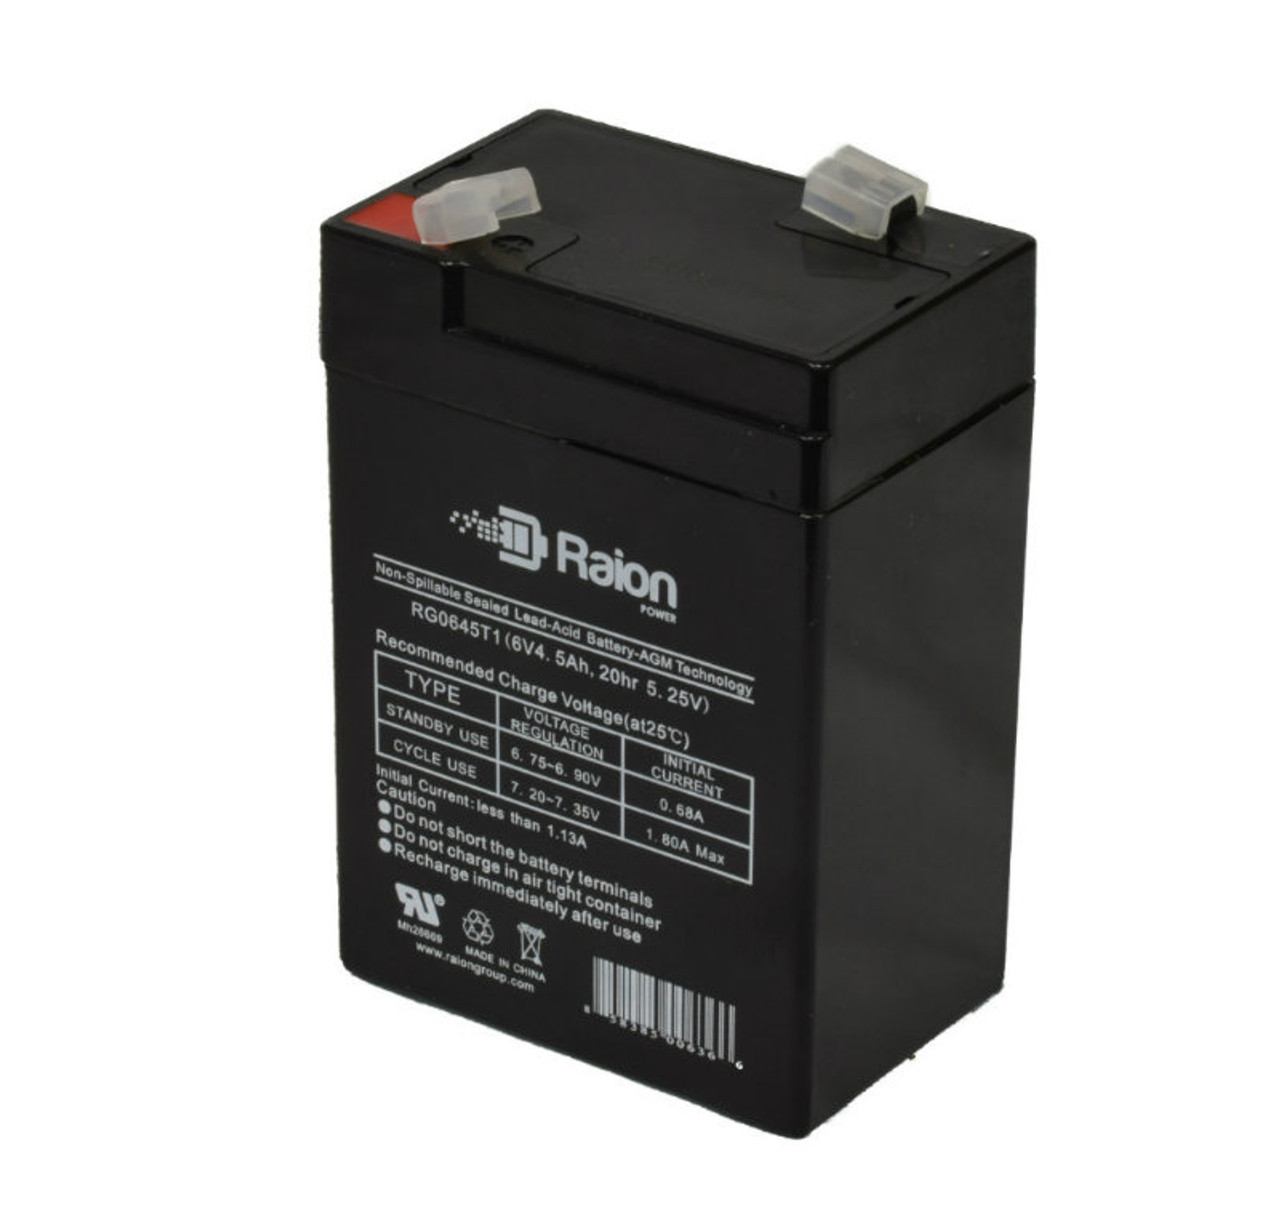 Raion Power RG0645T1 6V 4.5Ah Replacement Battery Cartridge for Chloride 1000010145